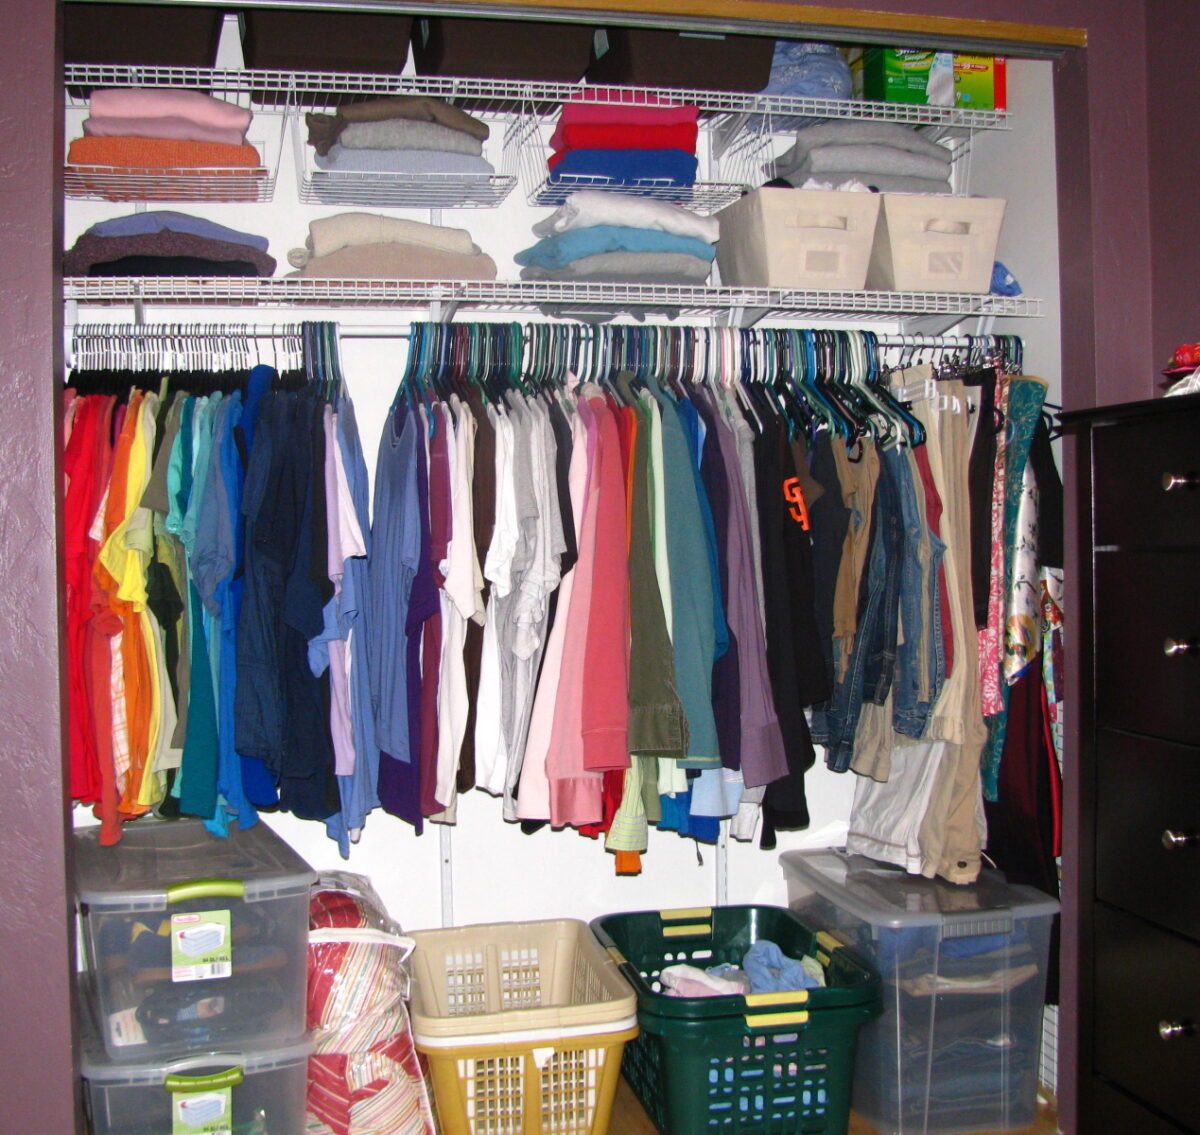 An organized closet. photo by Liz (perspicacious.org) on Flickr